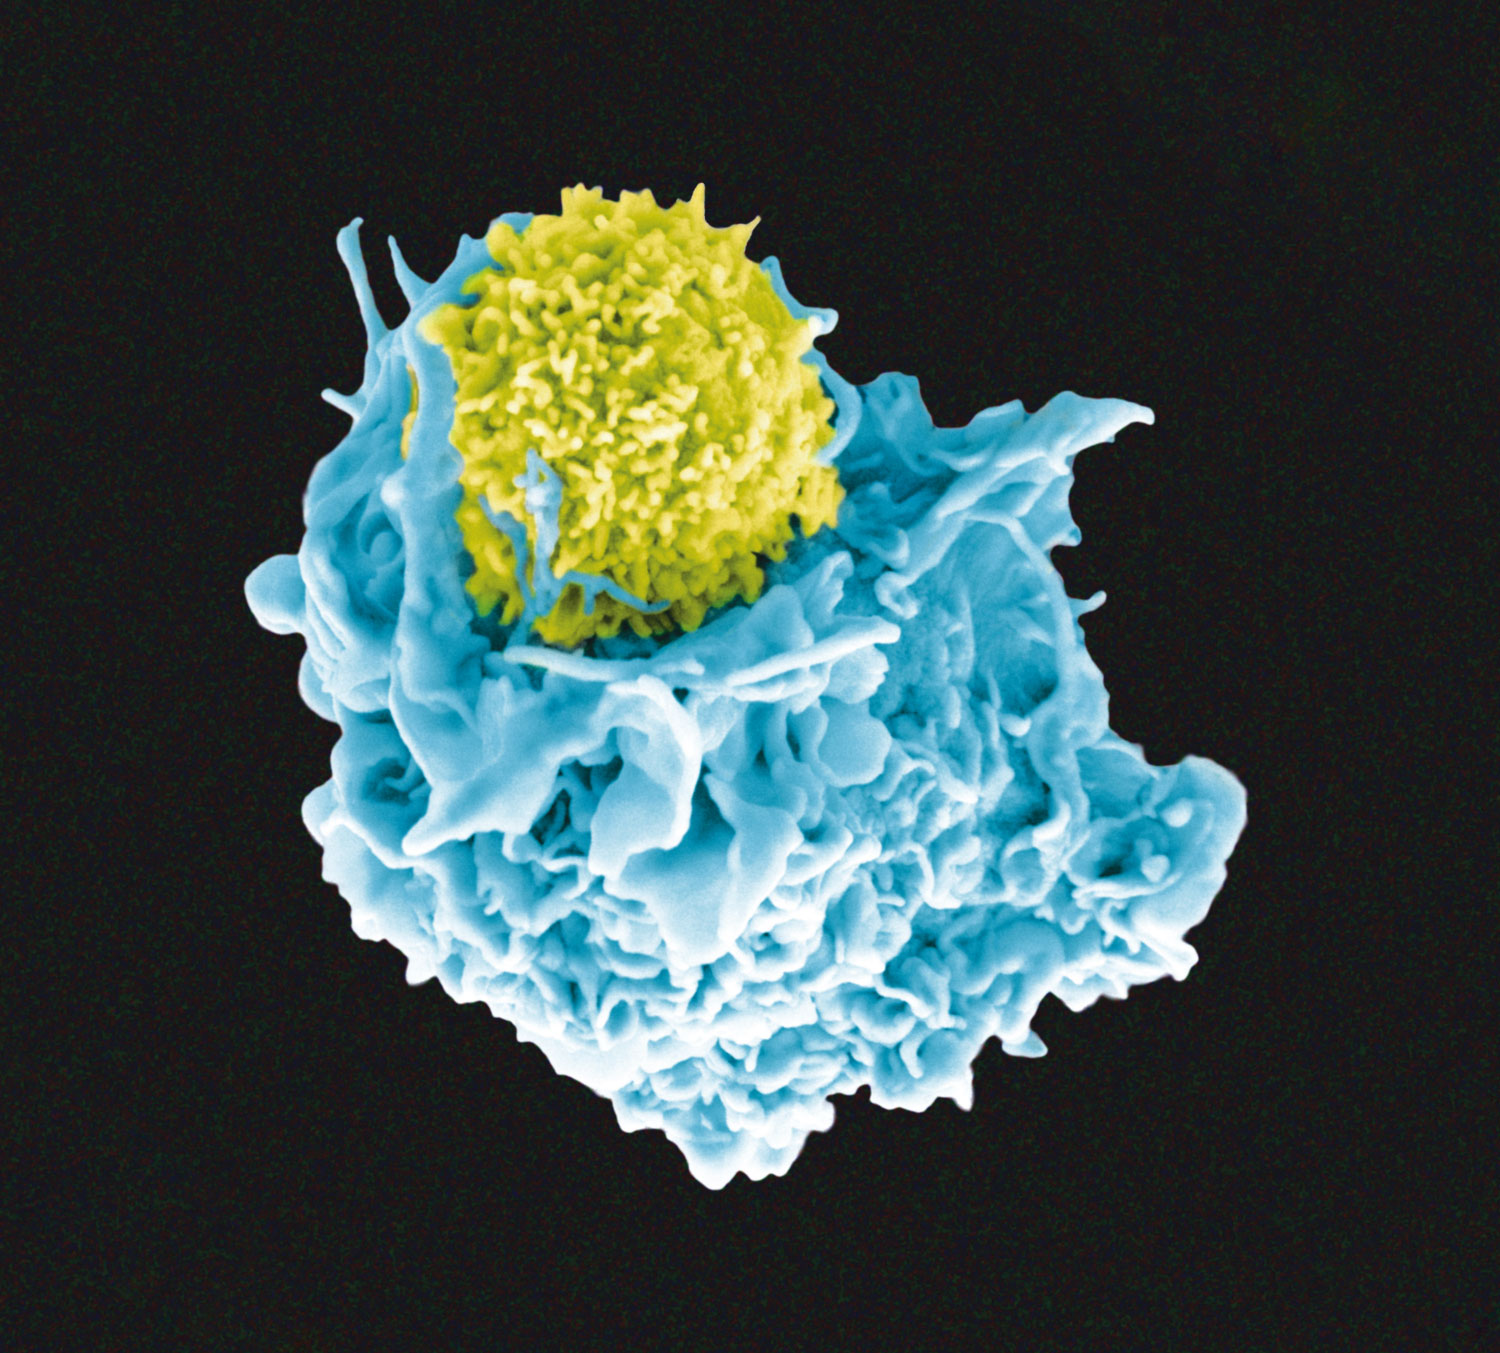 An antigen-presenting dendritic cell (blue) interacting with a T cell (yellow)